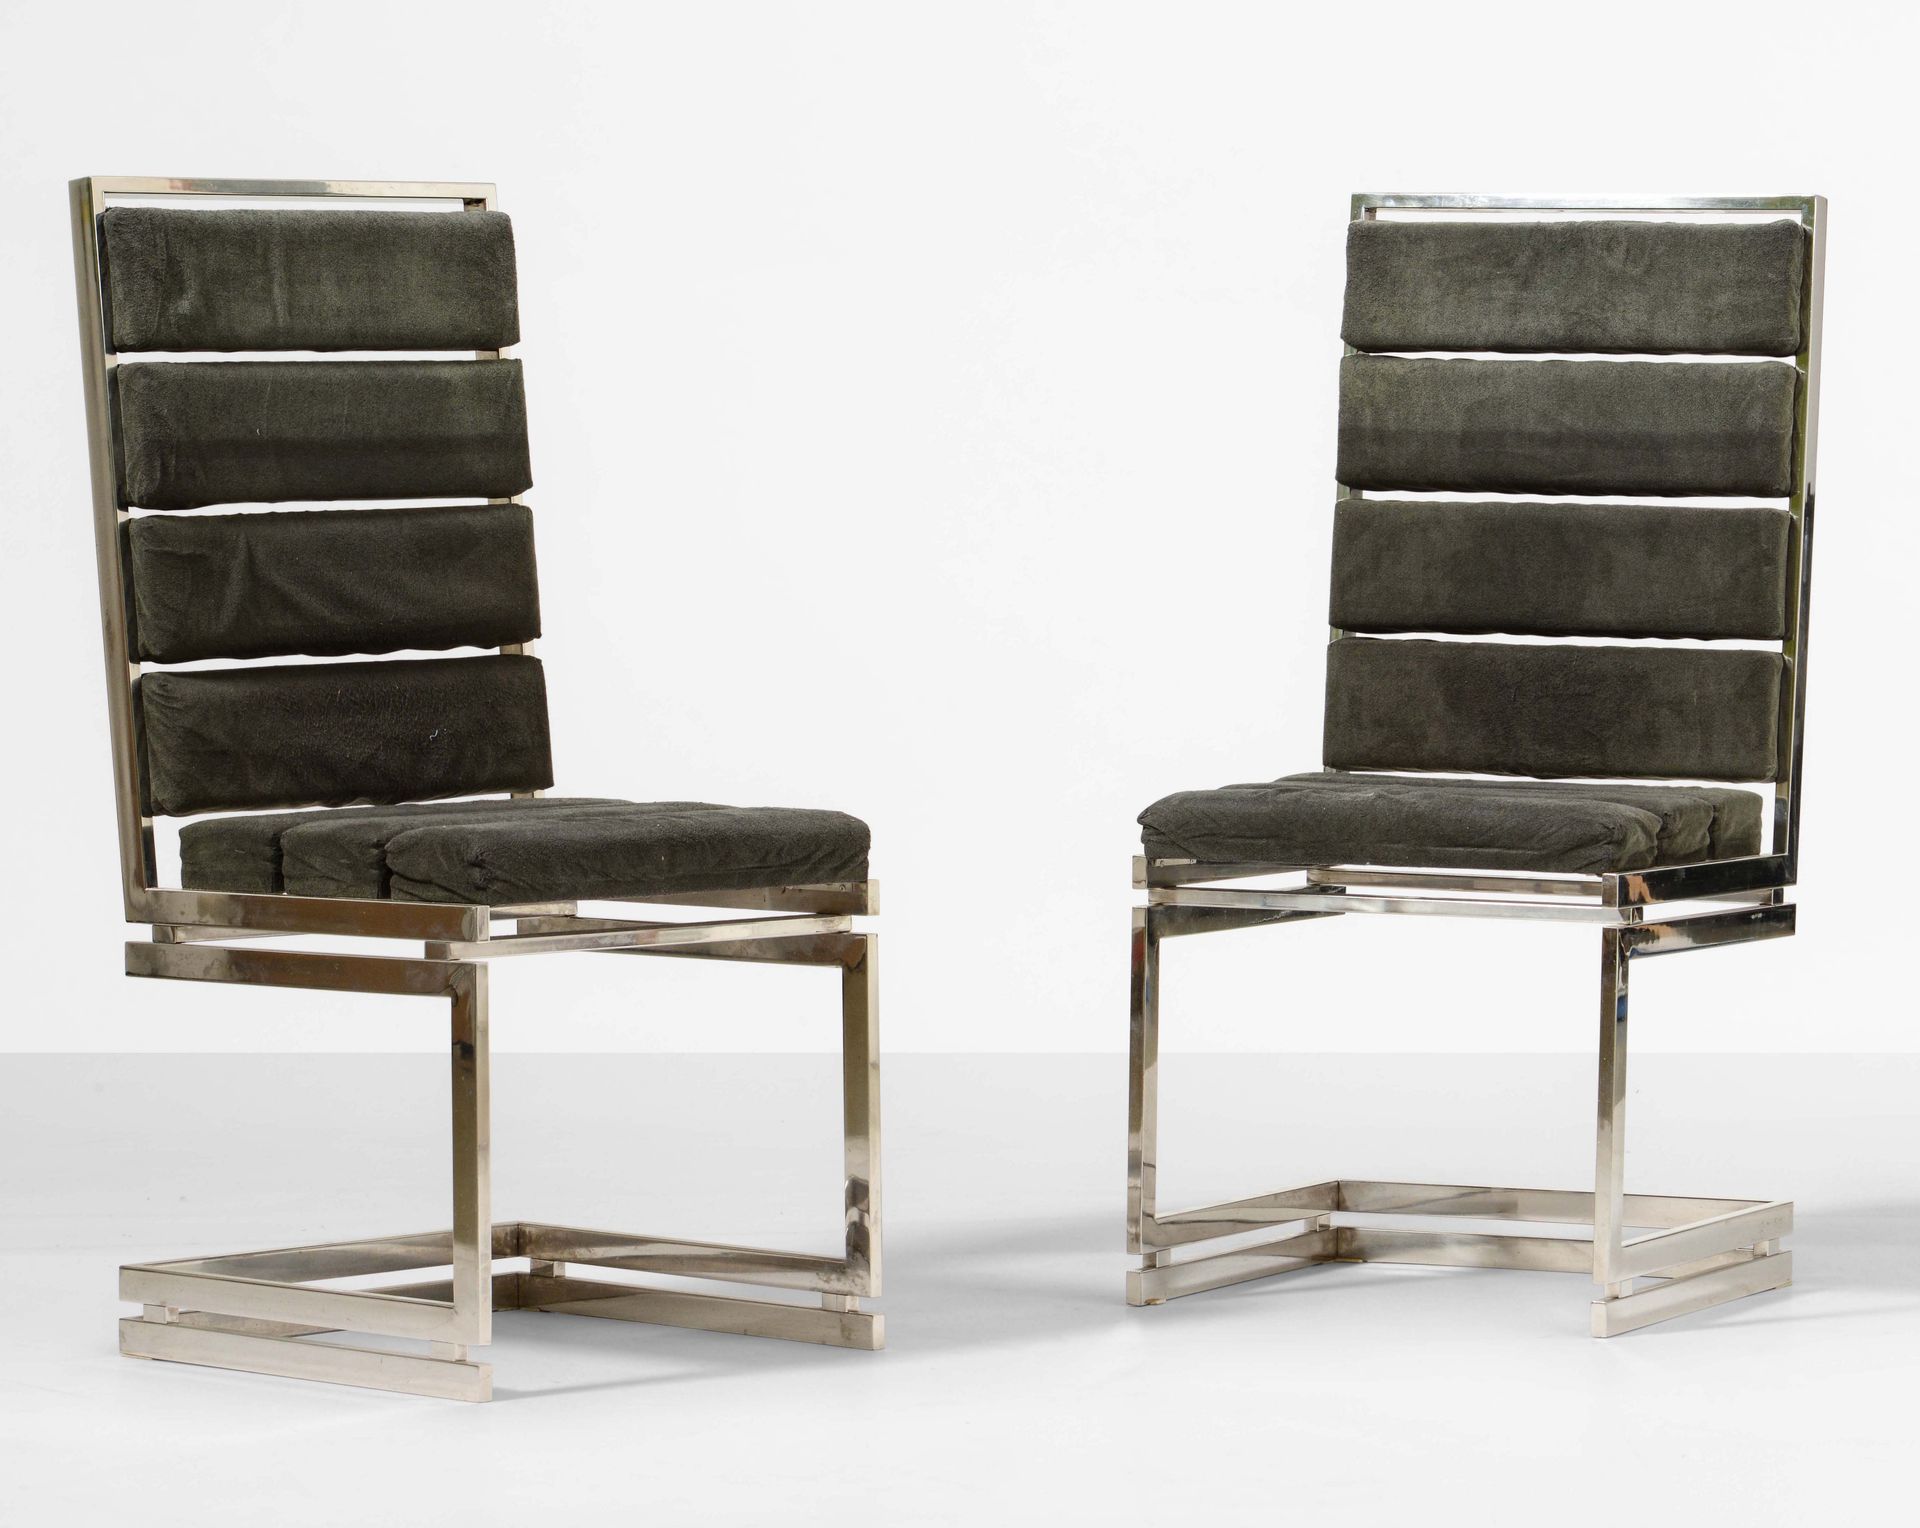 Romeo Rega, Pair of chairs mod. Doghe with chromium-plated metal frame and velve&hellip;